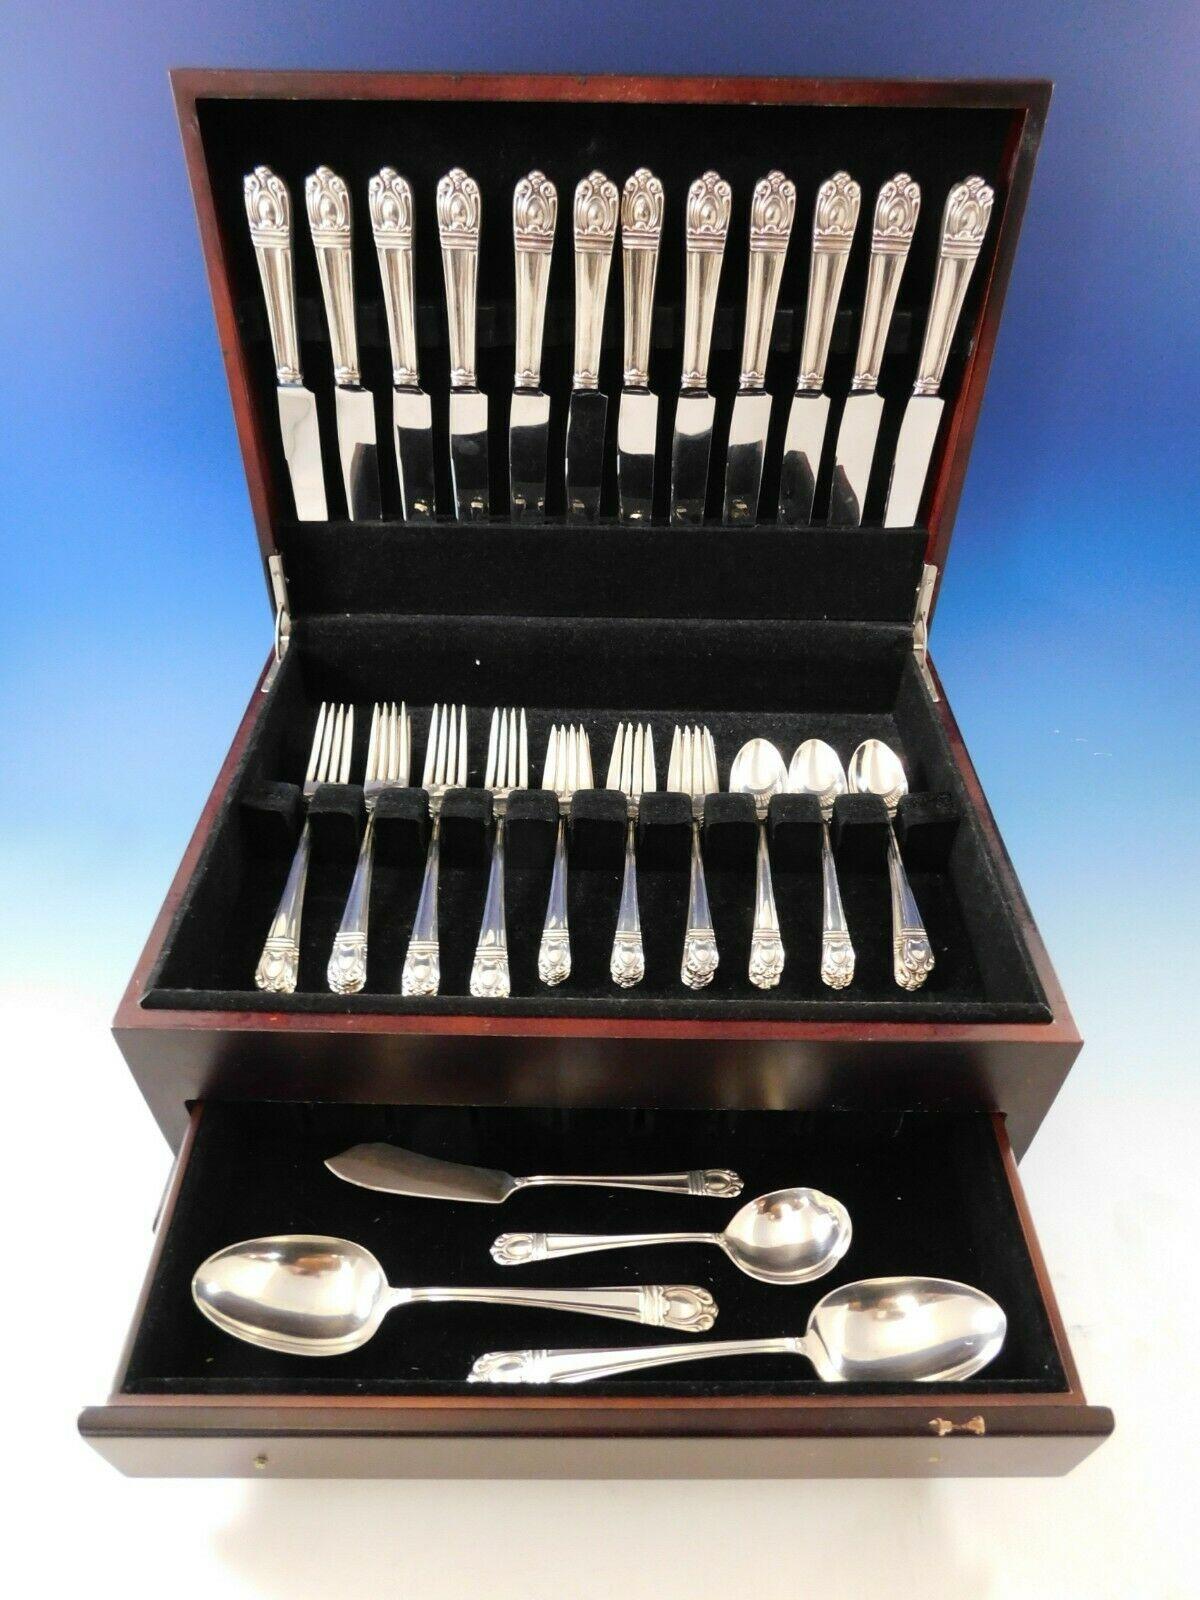 Exquisite Sonja by International, circa 1937, sterling silver flatware set with modern design, 52 pieces. This set includes:

 12 knives, 9 1/8